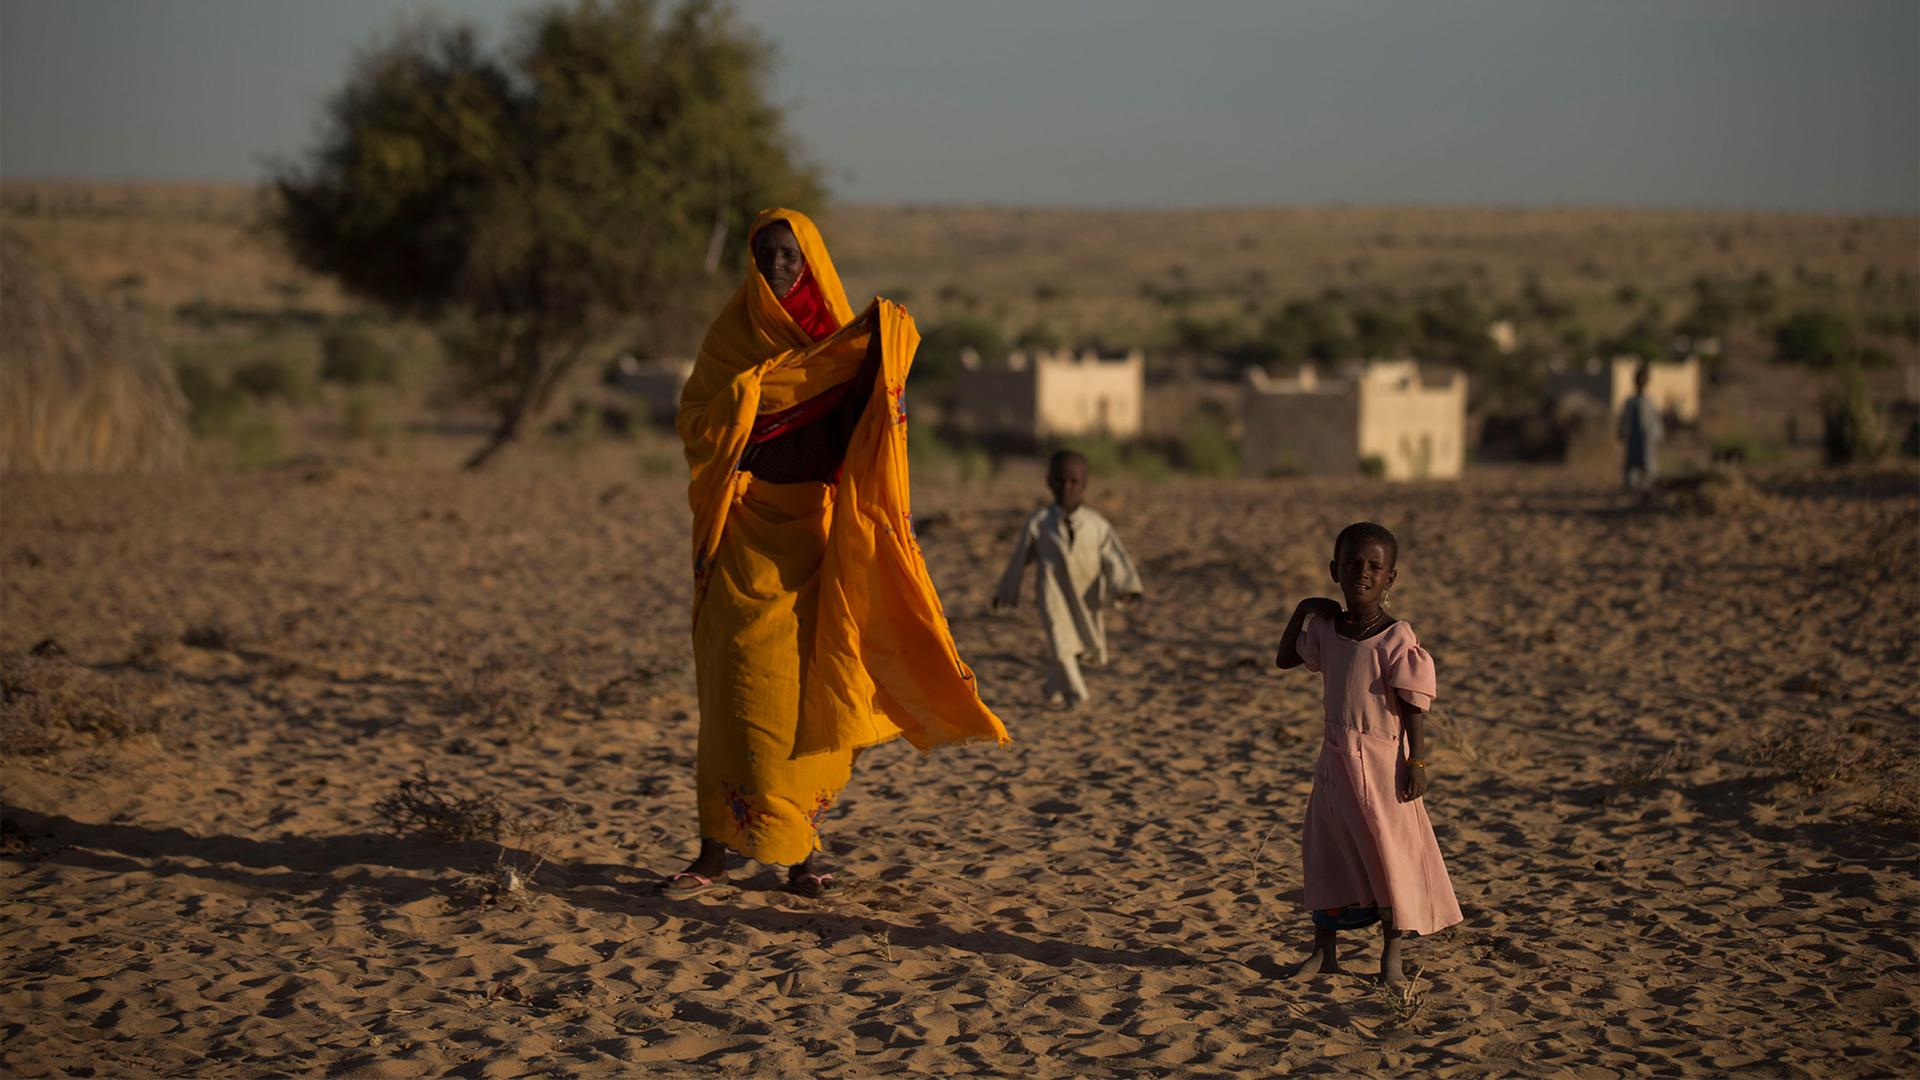 Woman in orange outfit walks in dry climate with girl in pink dress and boy in beige outfit